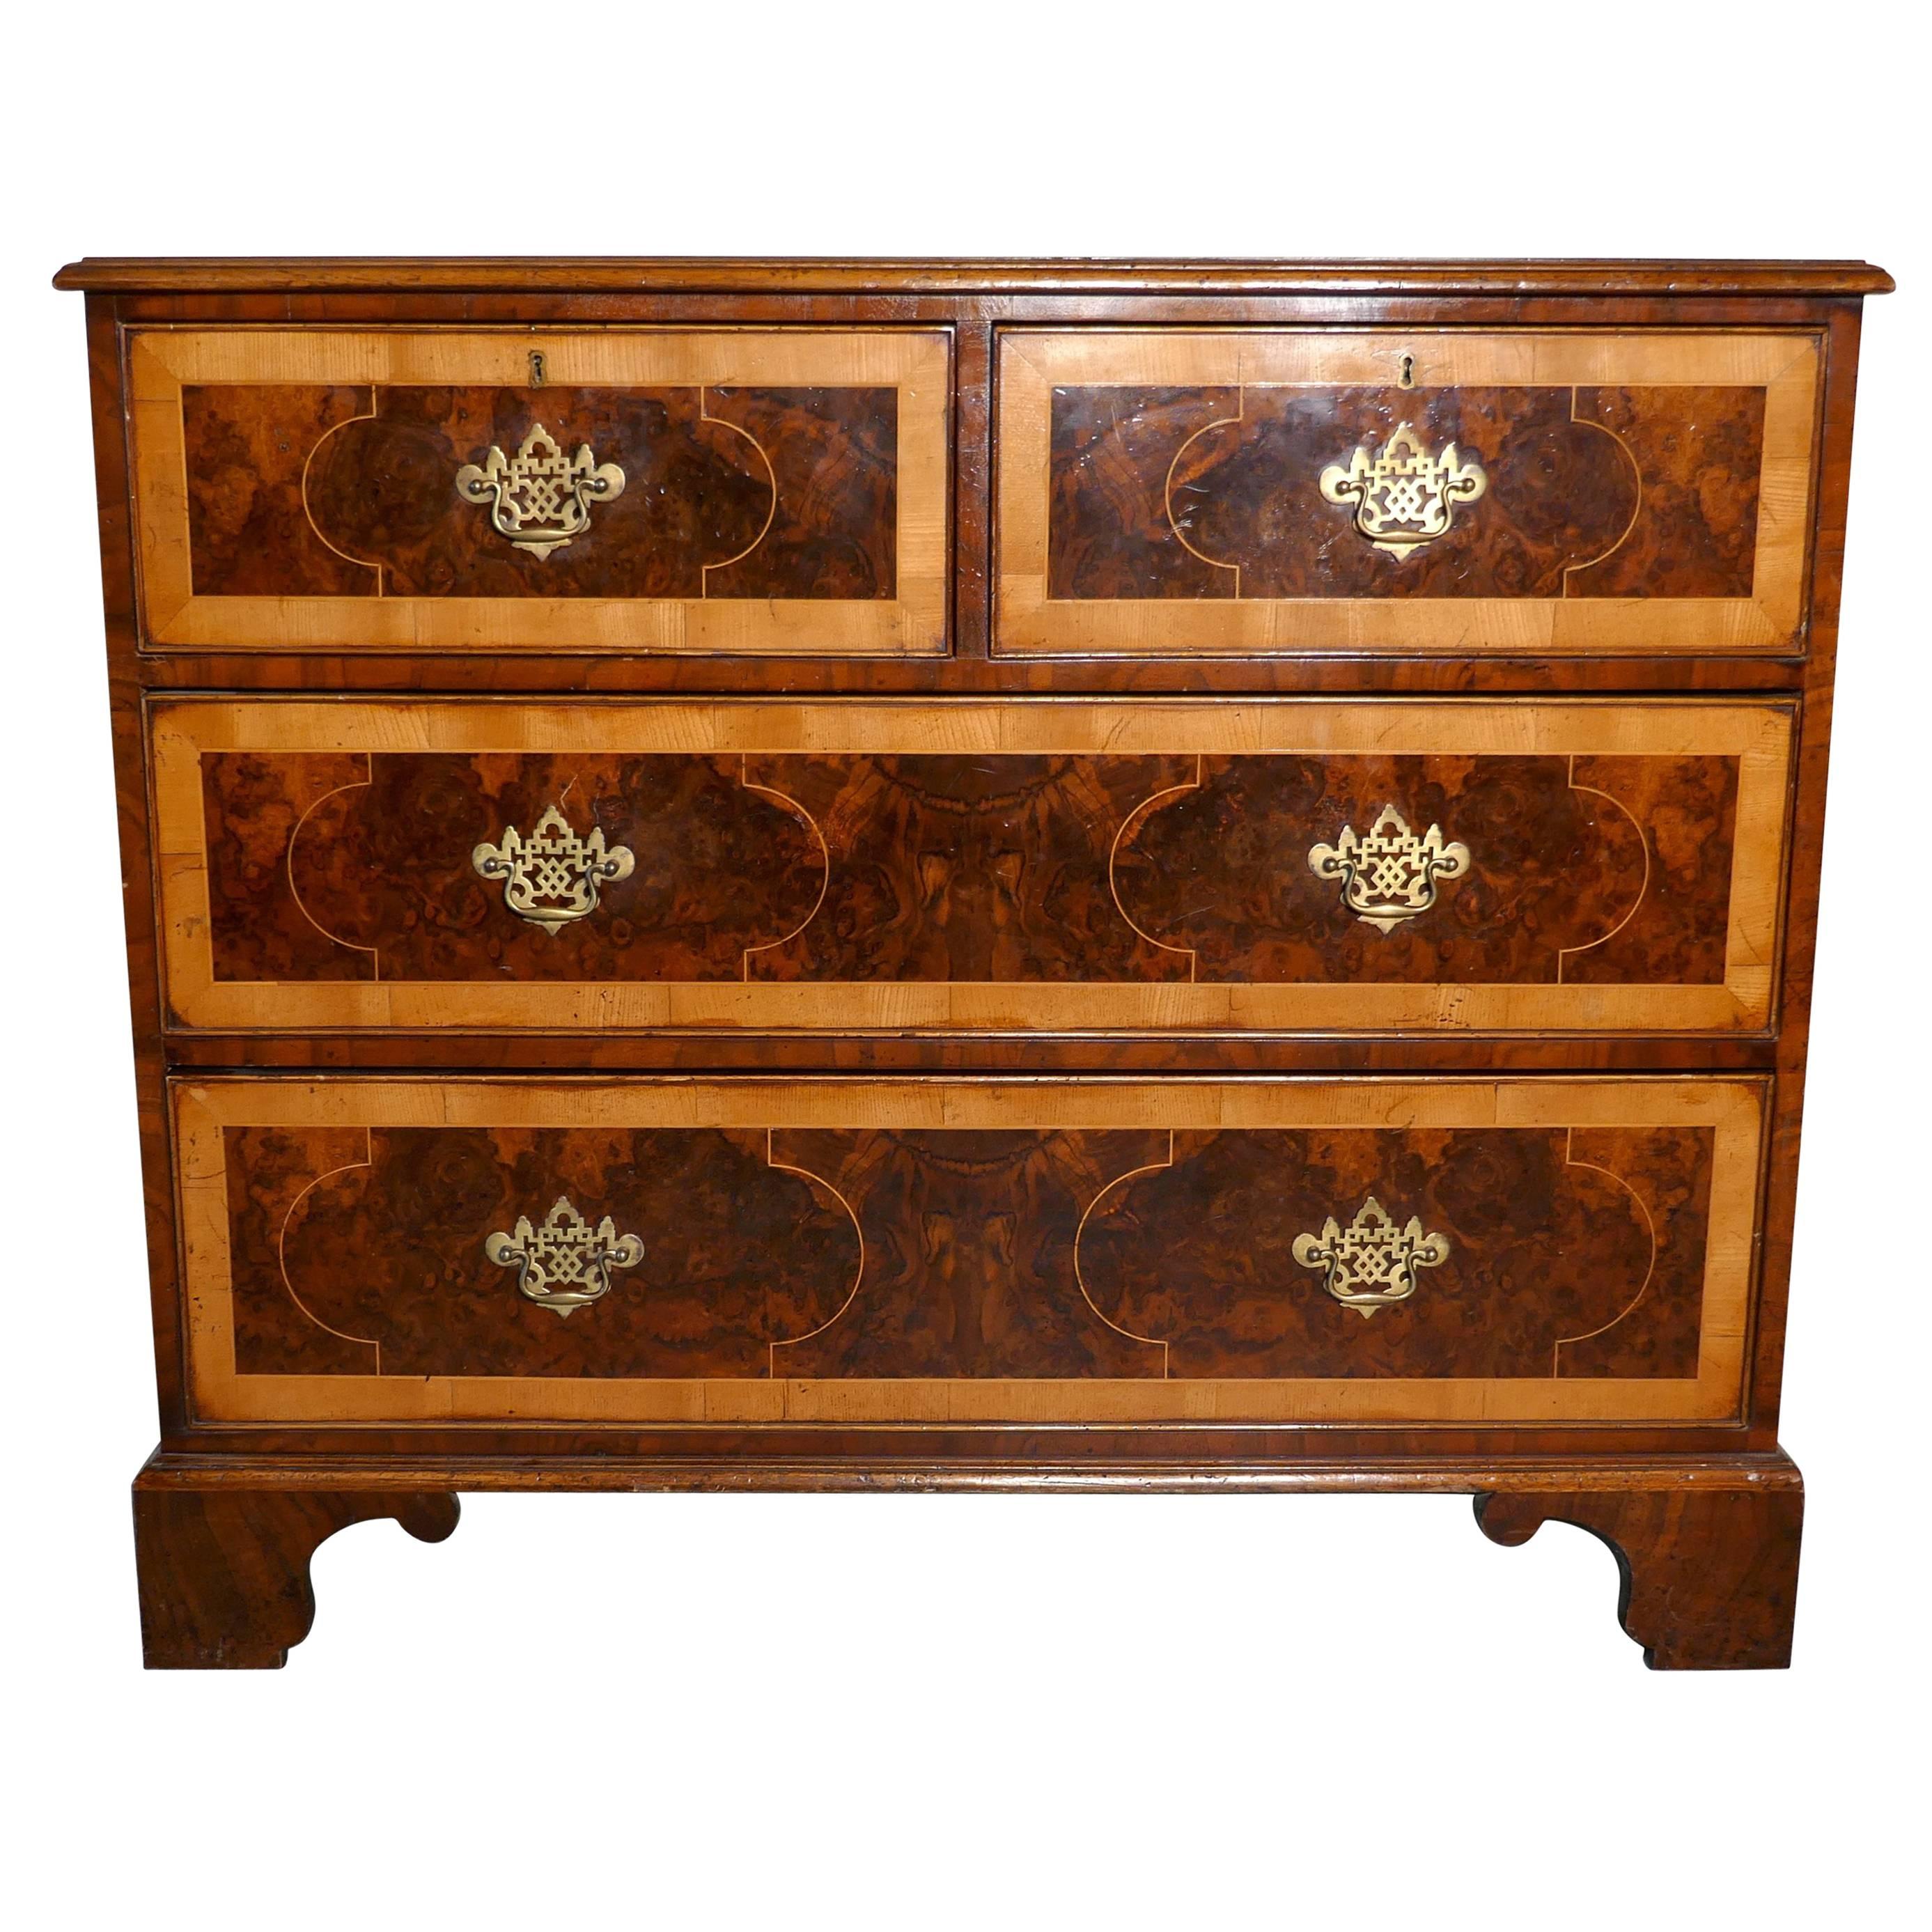 Early 19th Century Large Inlaid Walnut and Satinwood Chest of Drawers